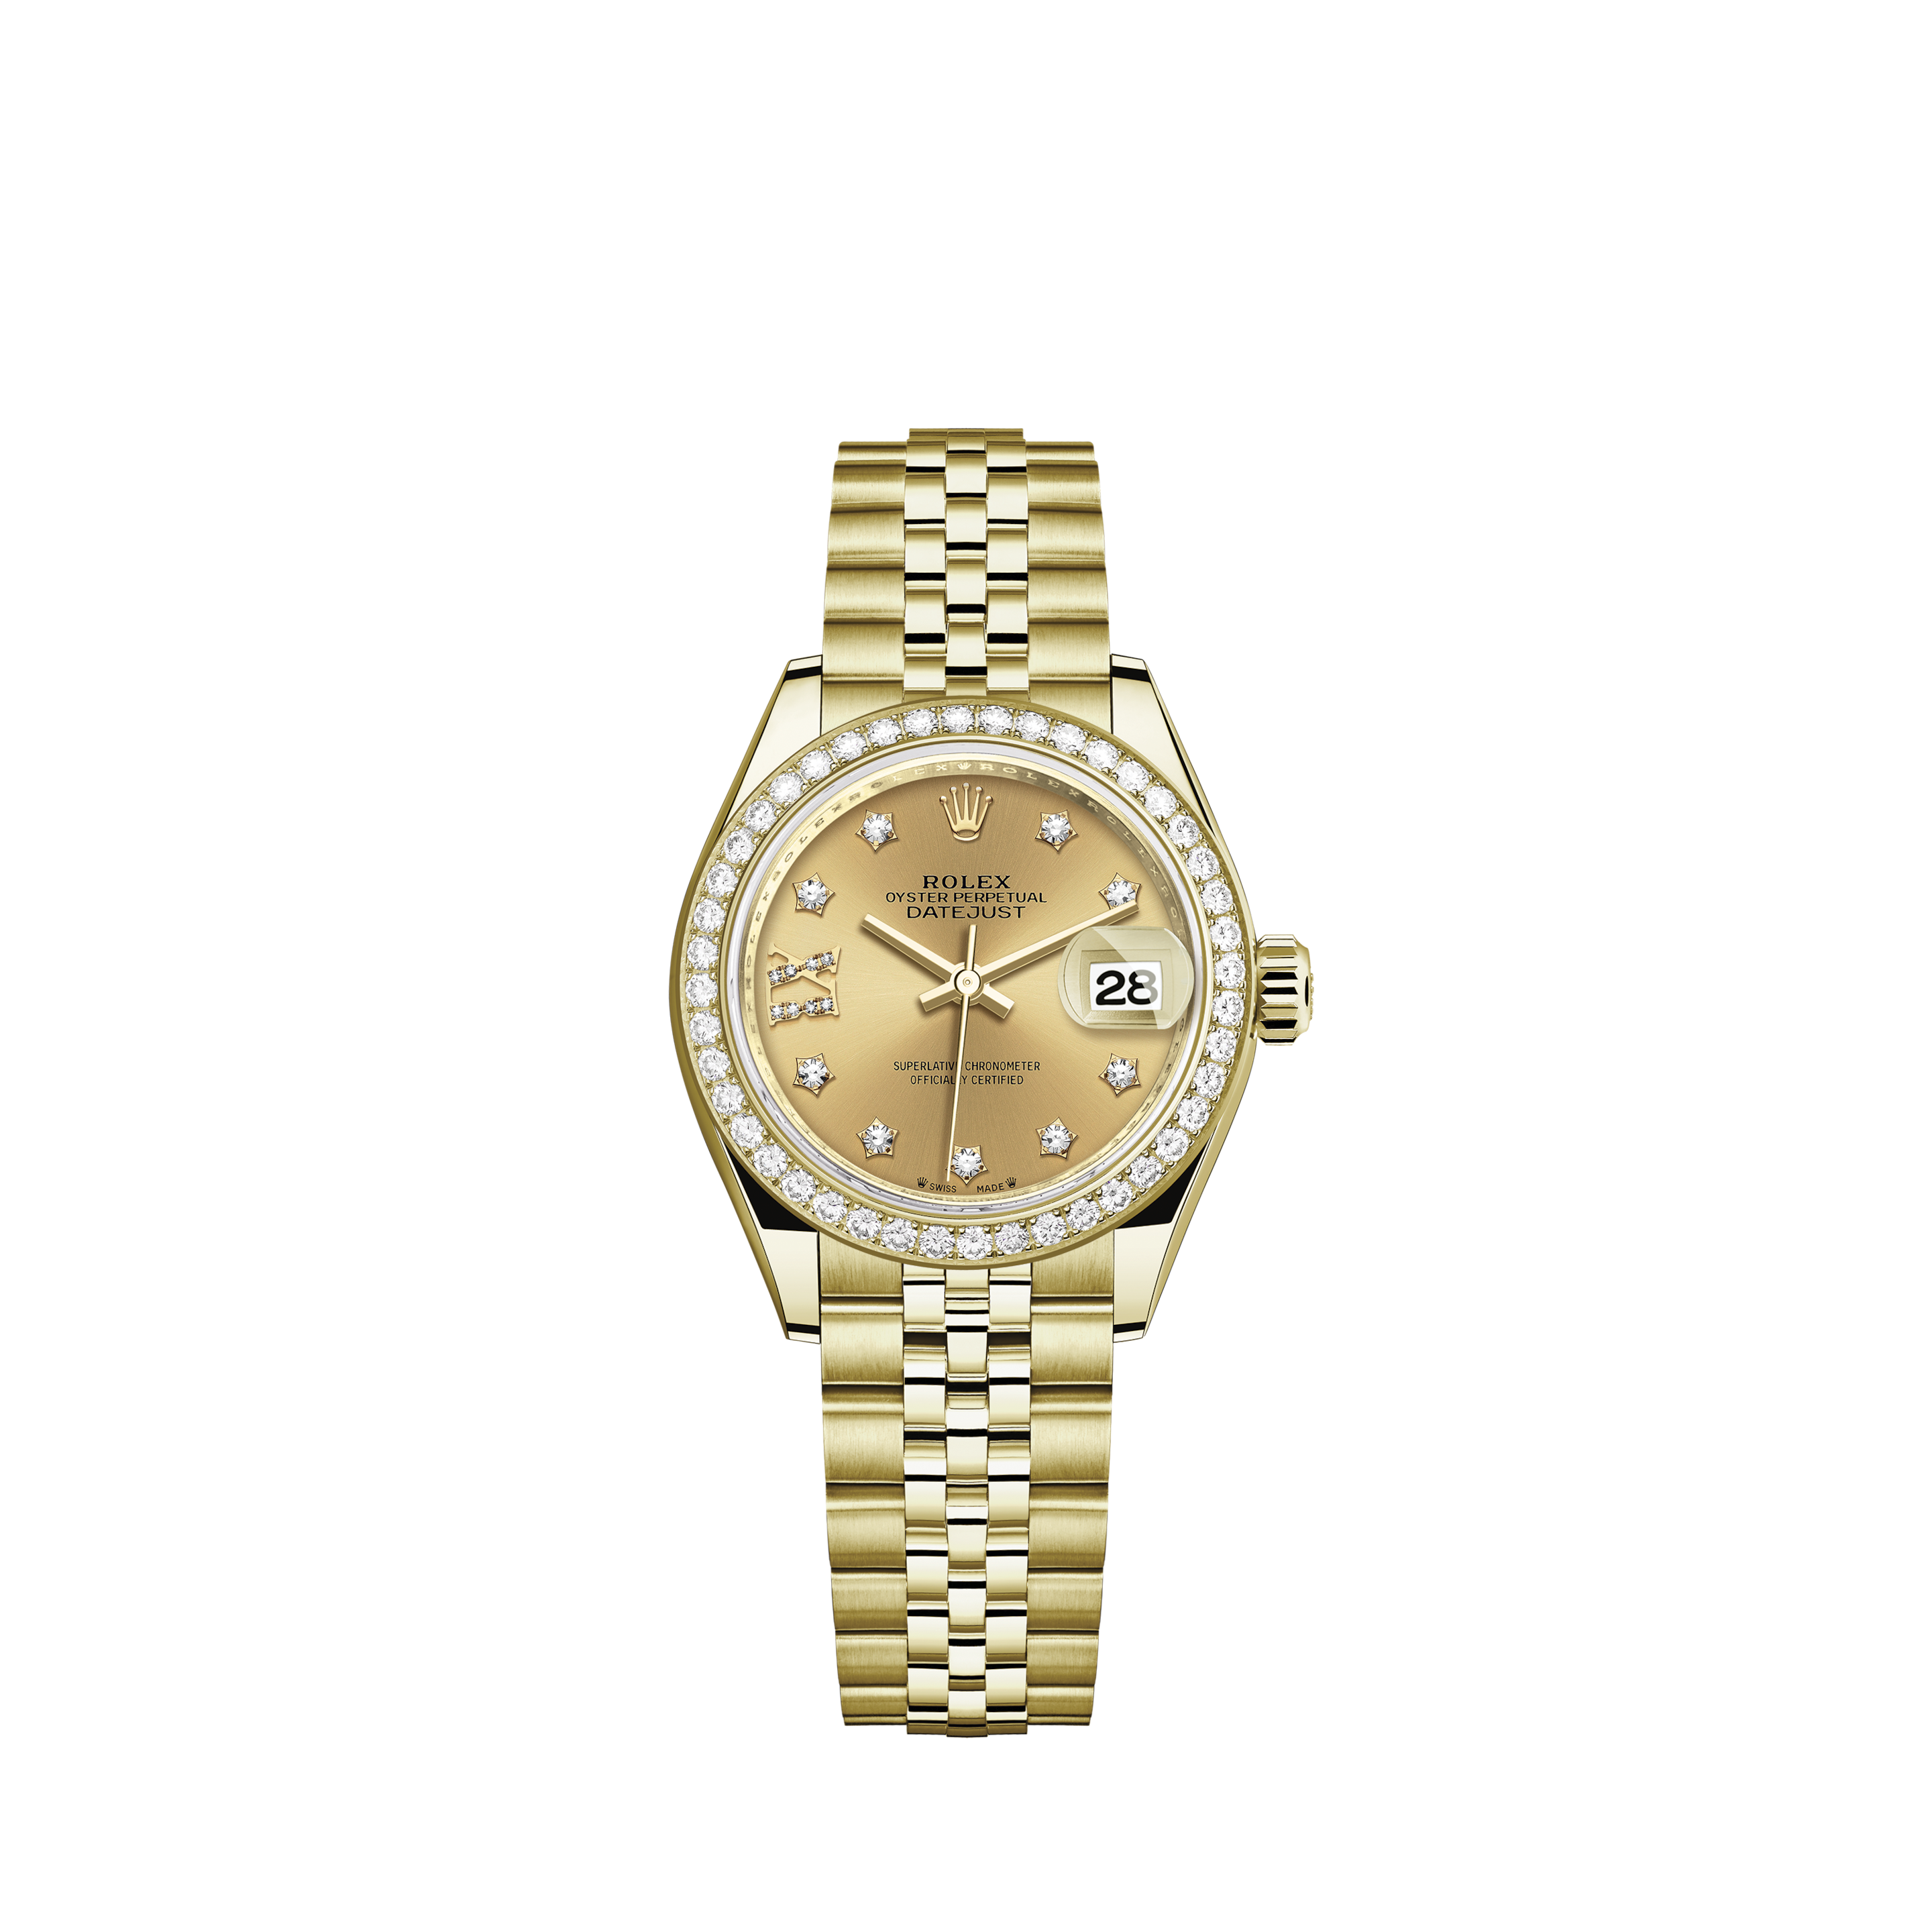 Rolex Datejust 36 18K Gold Diamonds Automatic Men's Watch Oyster Perpetual 16238